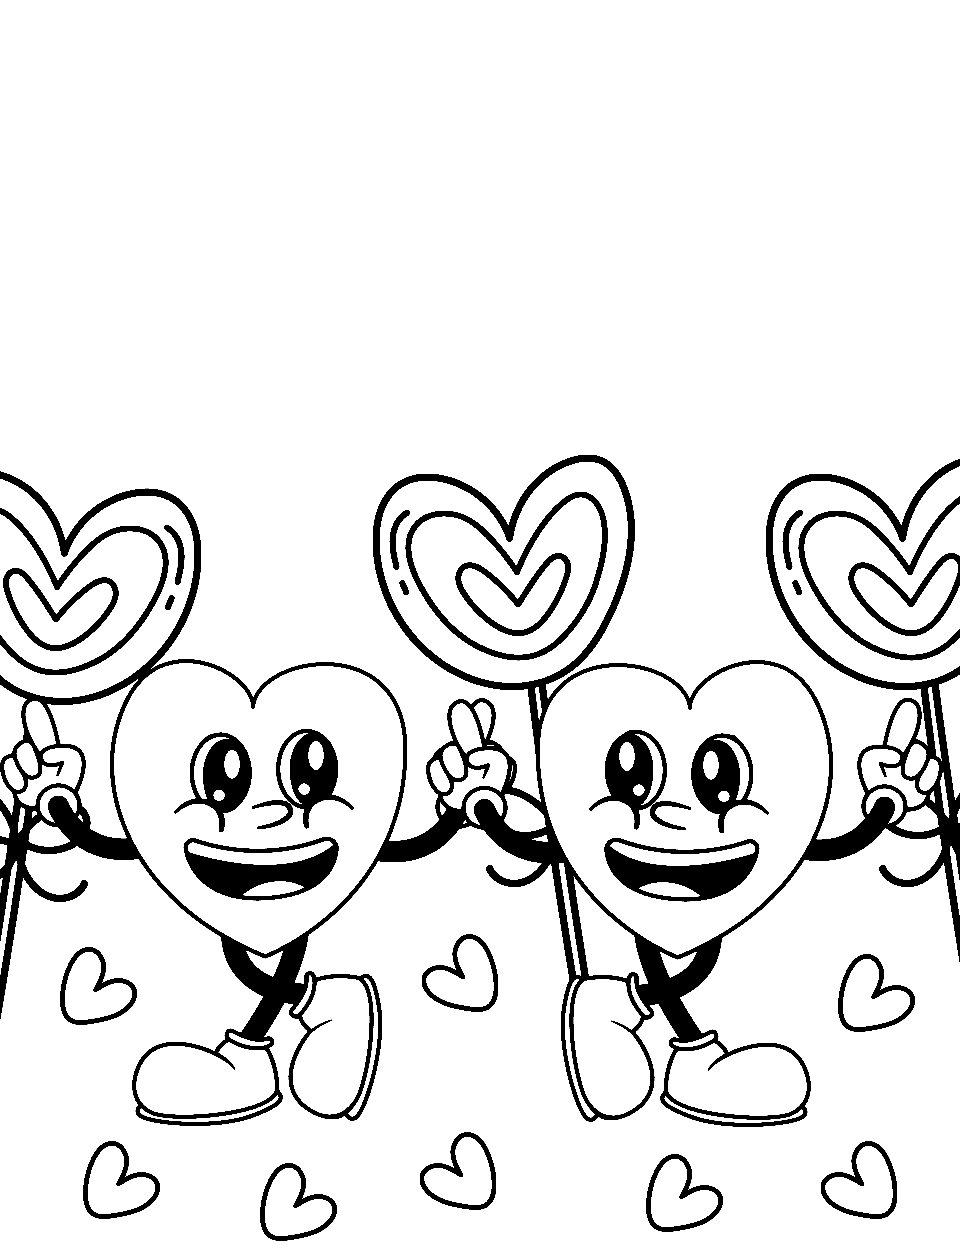 Dancing Heart Characters Coloring Page - Two hearts dancing together.